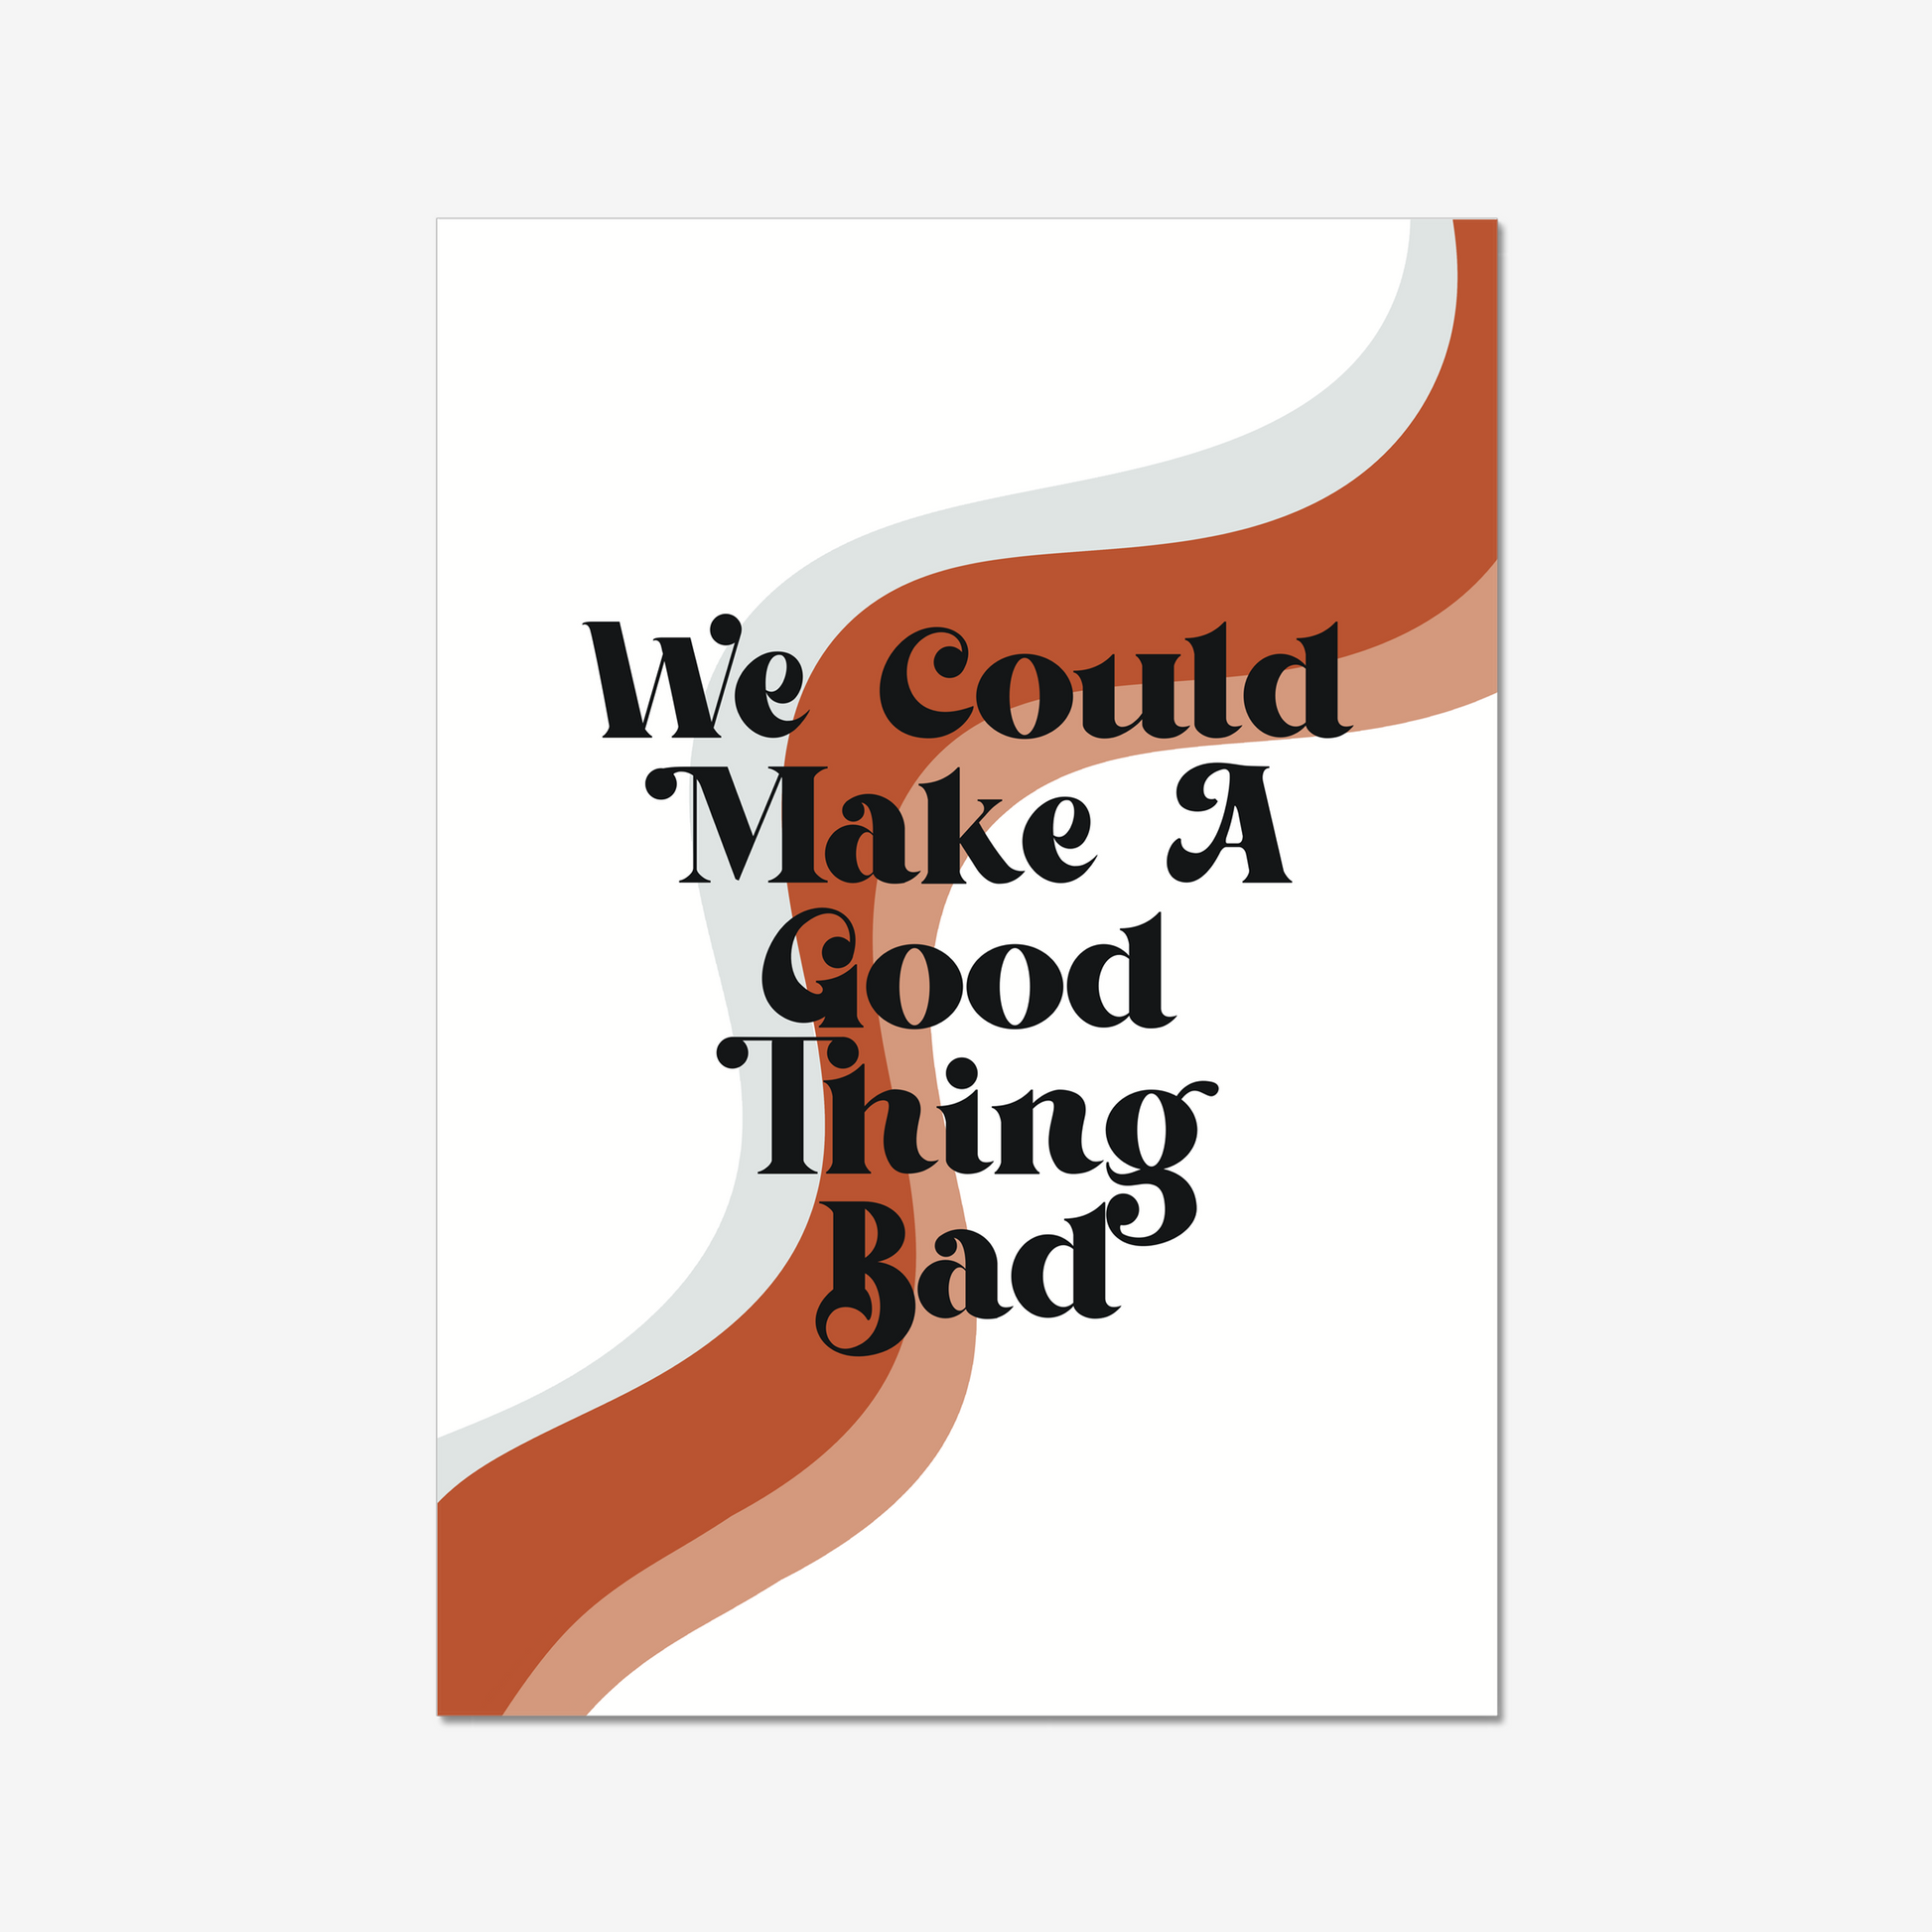 Introducing the latest addition to our collection of quote designs! This iconic lyric print is inspired by our favourite new show 'Daisy Jones and The Six'.  WE COULD MAKE A GOOD THING BAD. Printed in a retro styled font, this quote resonates with the essence of the show's story, where music, love, and fame collided in the most explosive ways. 